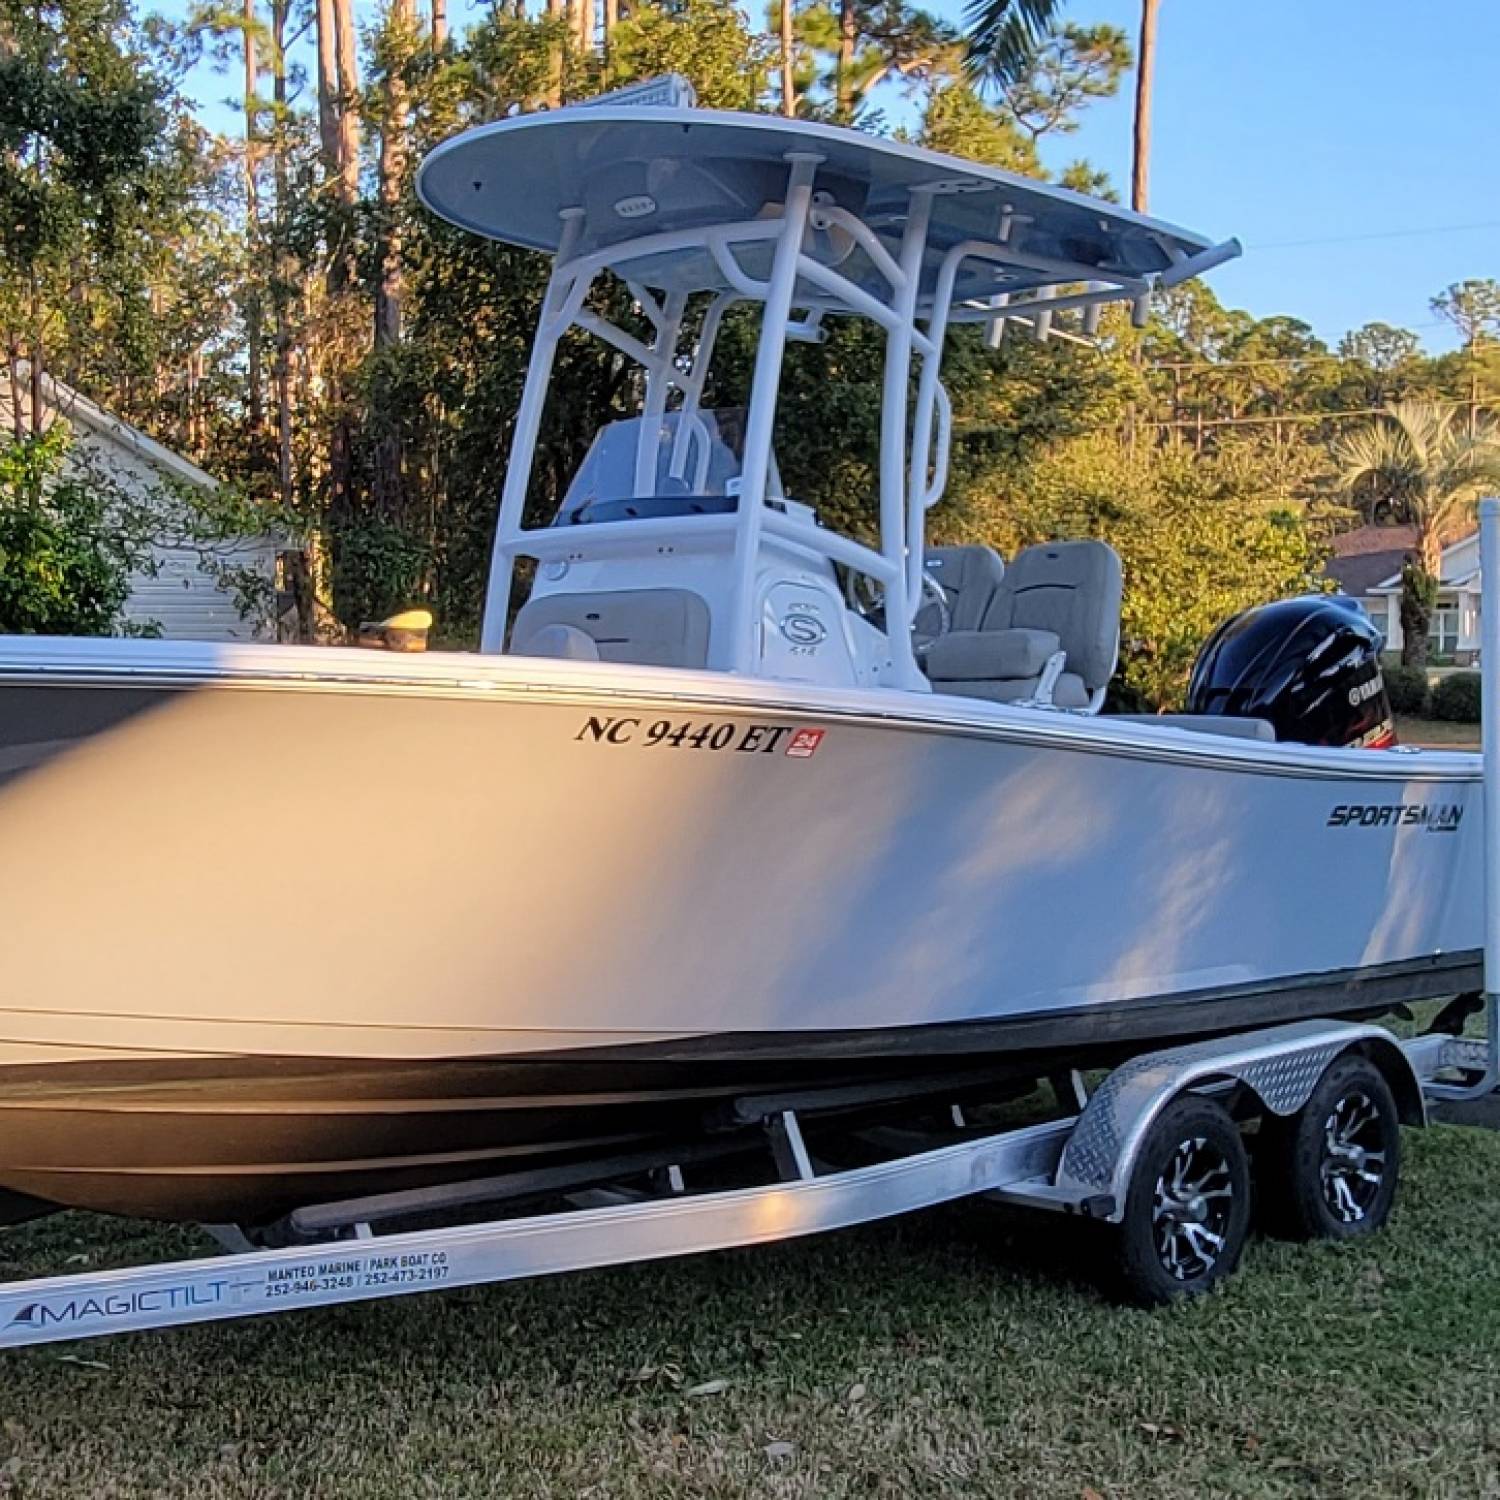 Title: Worth every mile - On board their Sportsman Open 212 Center Console - Location: Front yard. Participating in the Photo Contest #SportsmanApril